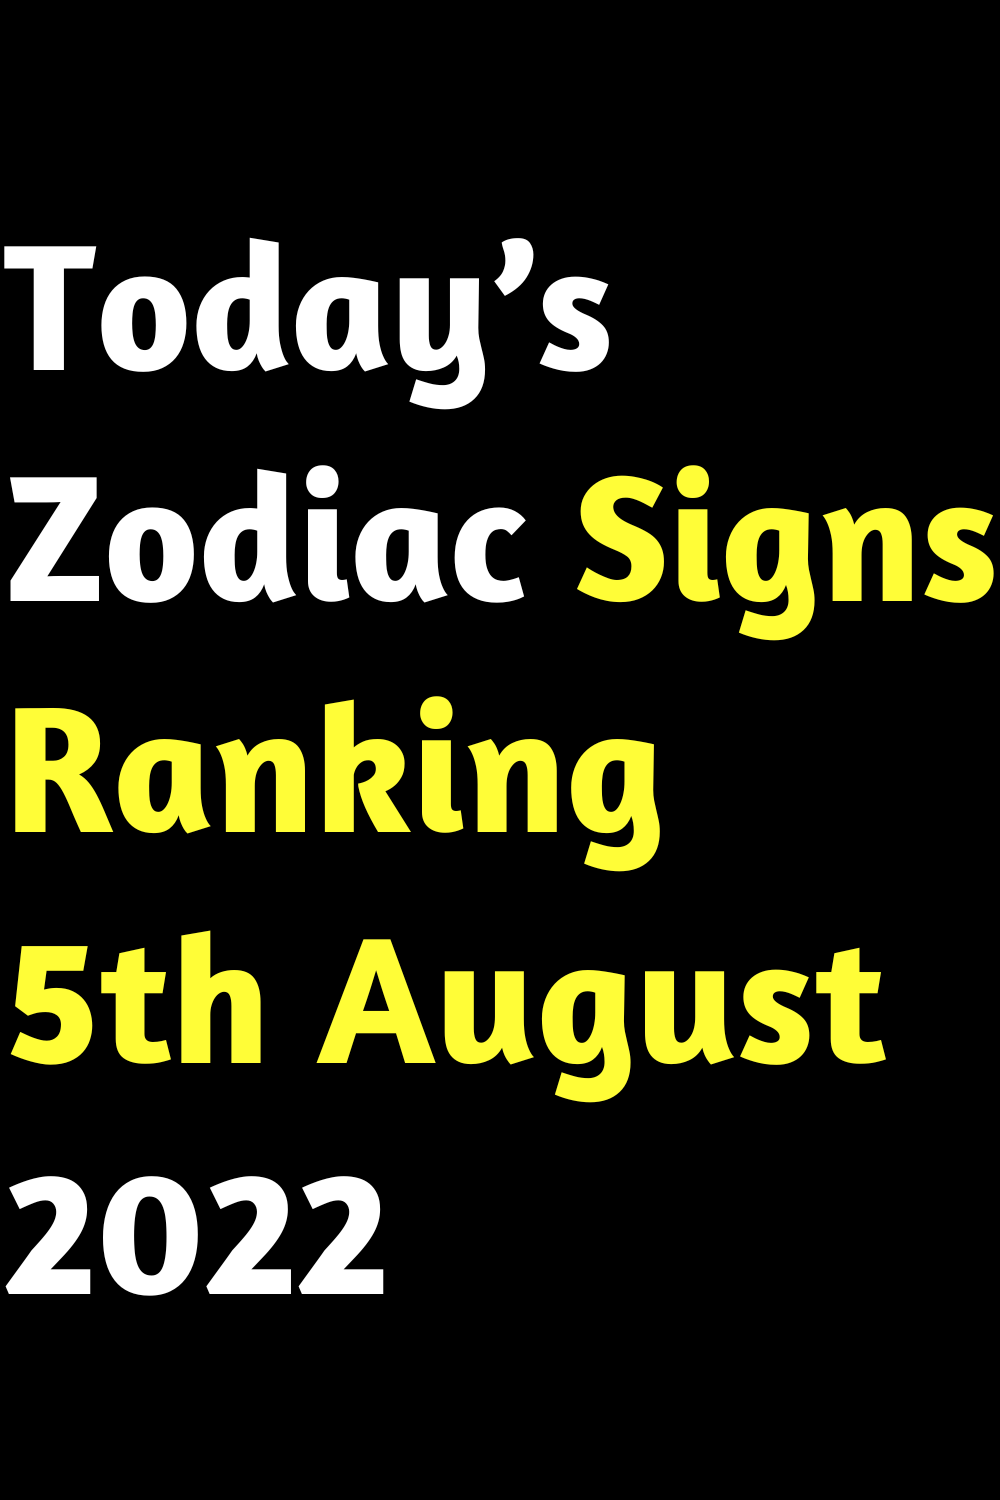 Today’s Zodiac Signs Ranking 5th August 2022